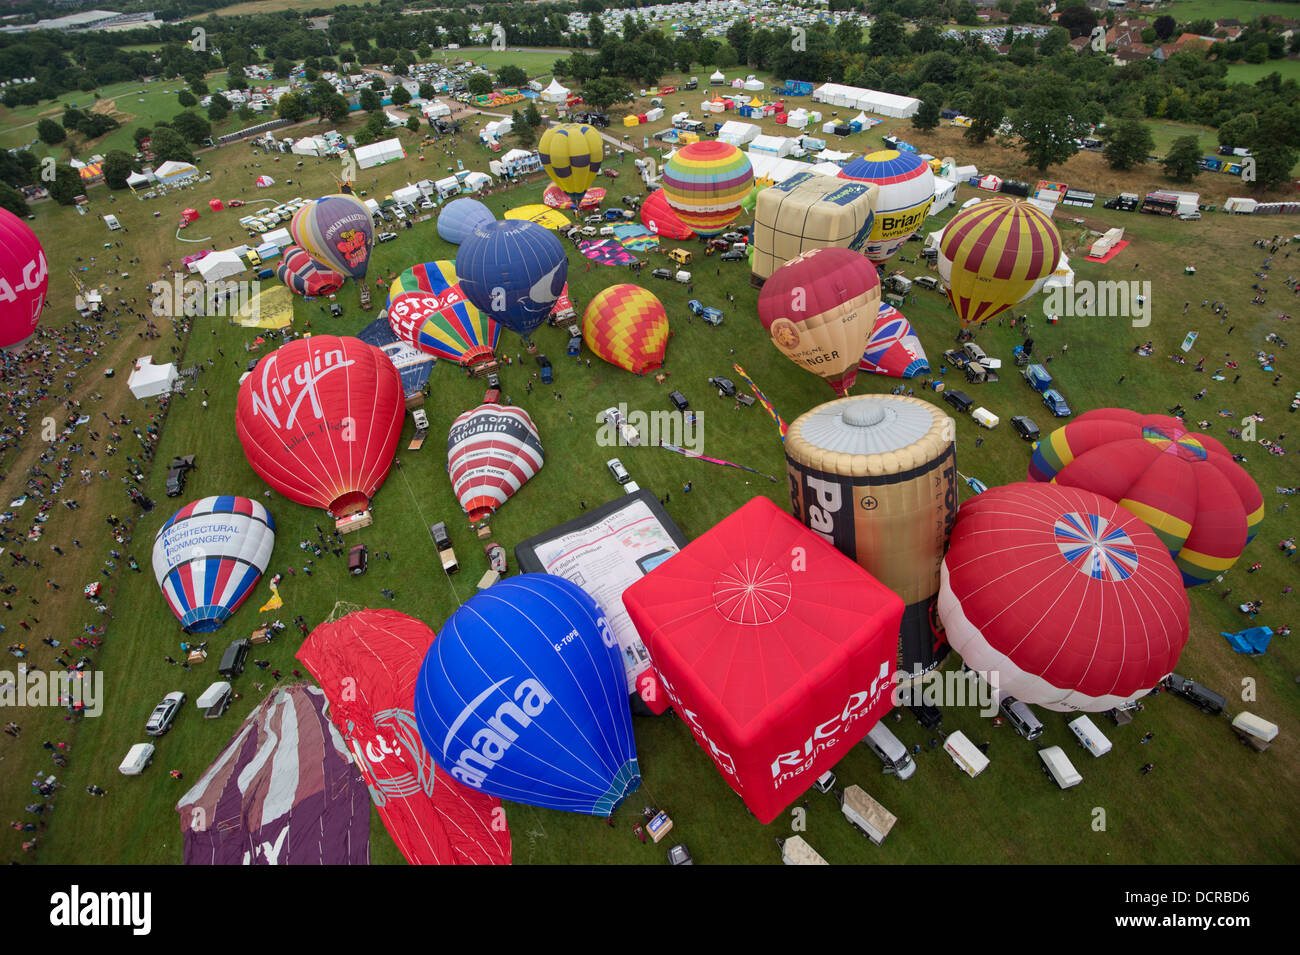 Bristol International Balloon Fiesta 2013, showing the mass ascent and landing of more than 100 balloons at this annual event. a UK Stock Photo